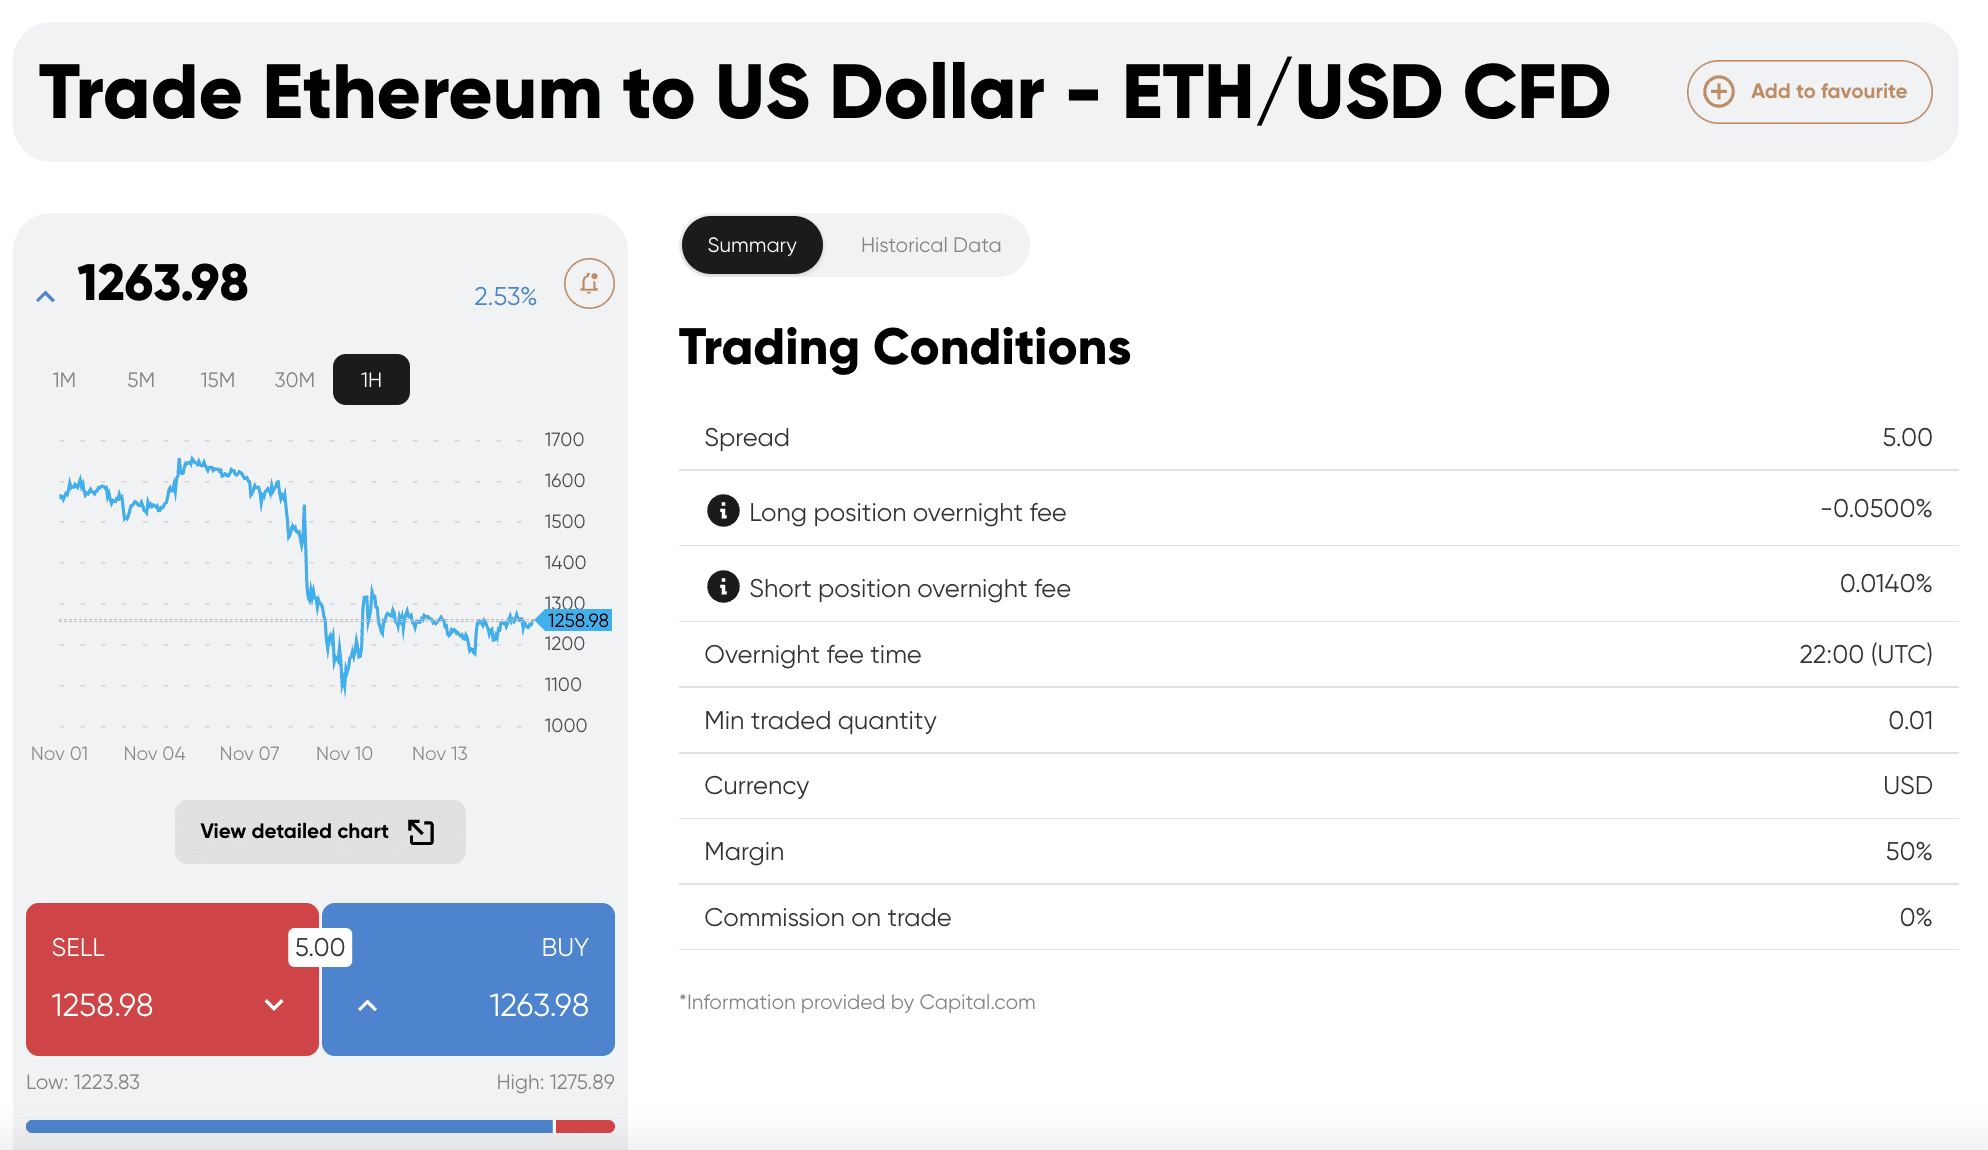 Trade Ethereum at Capital.com at 0% commission 